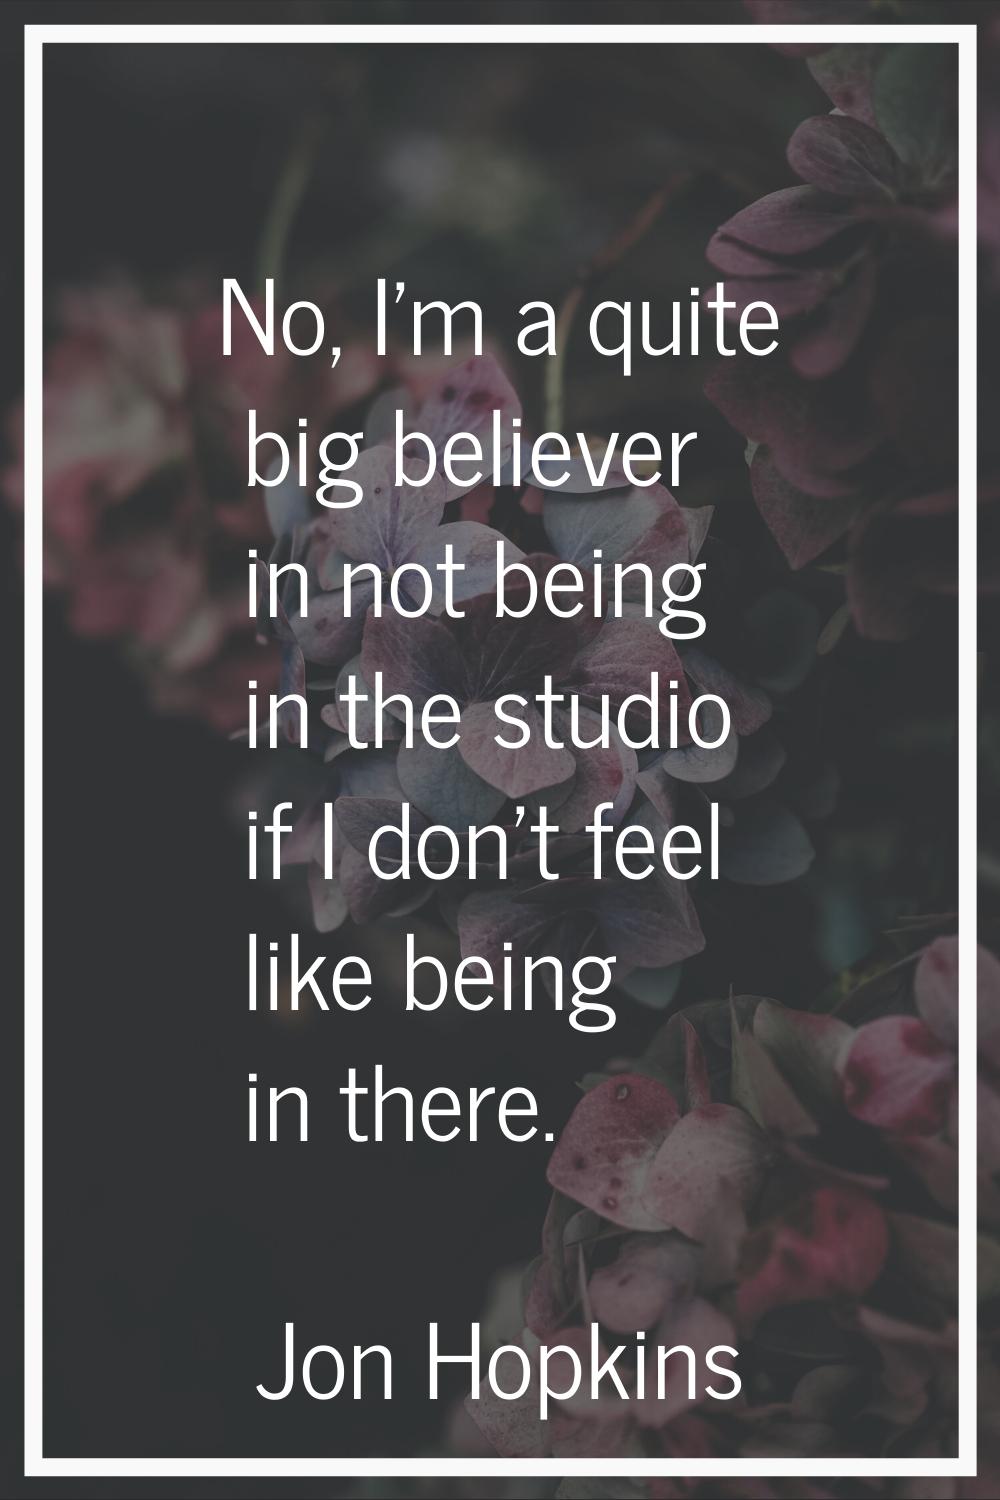 No, I'm a quite big believer in not being in the studio if I don't feel like being in there.